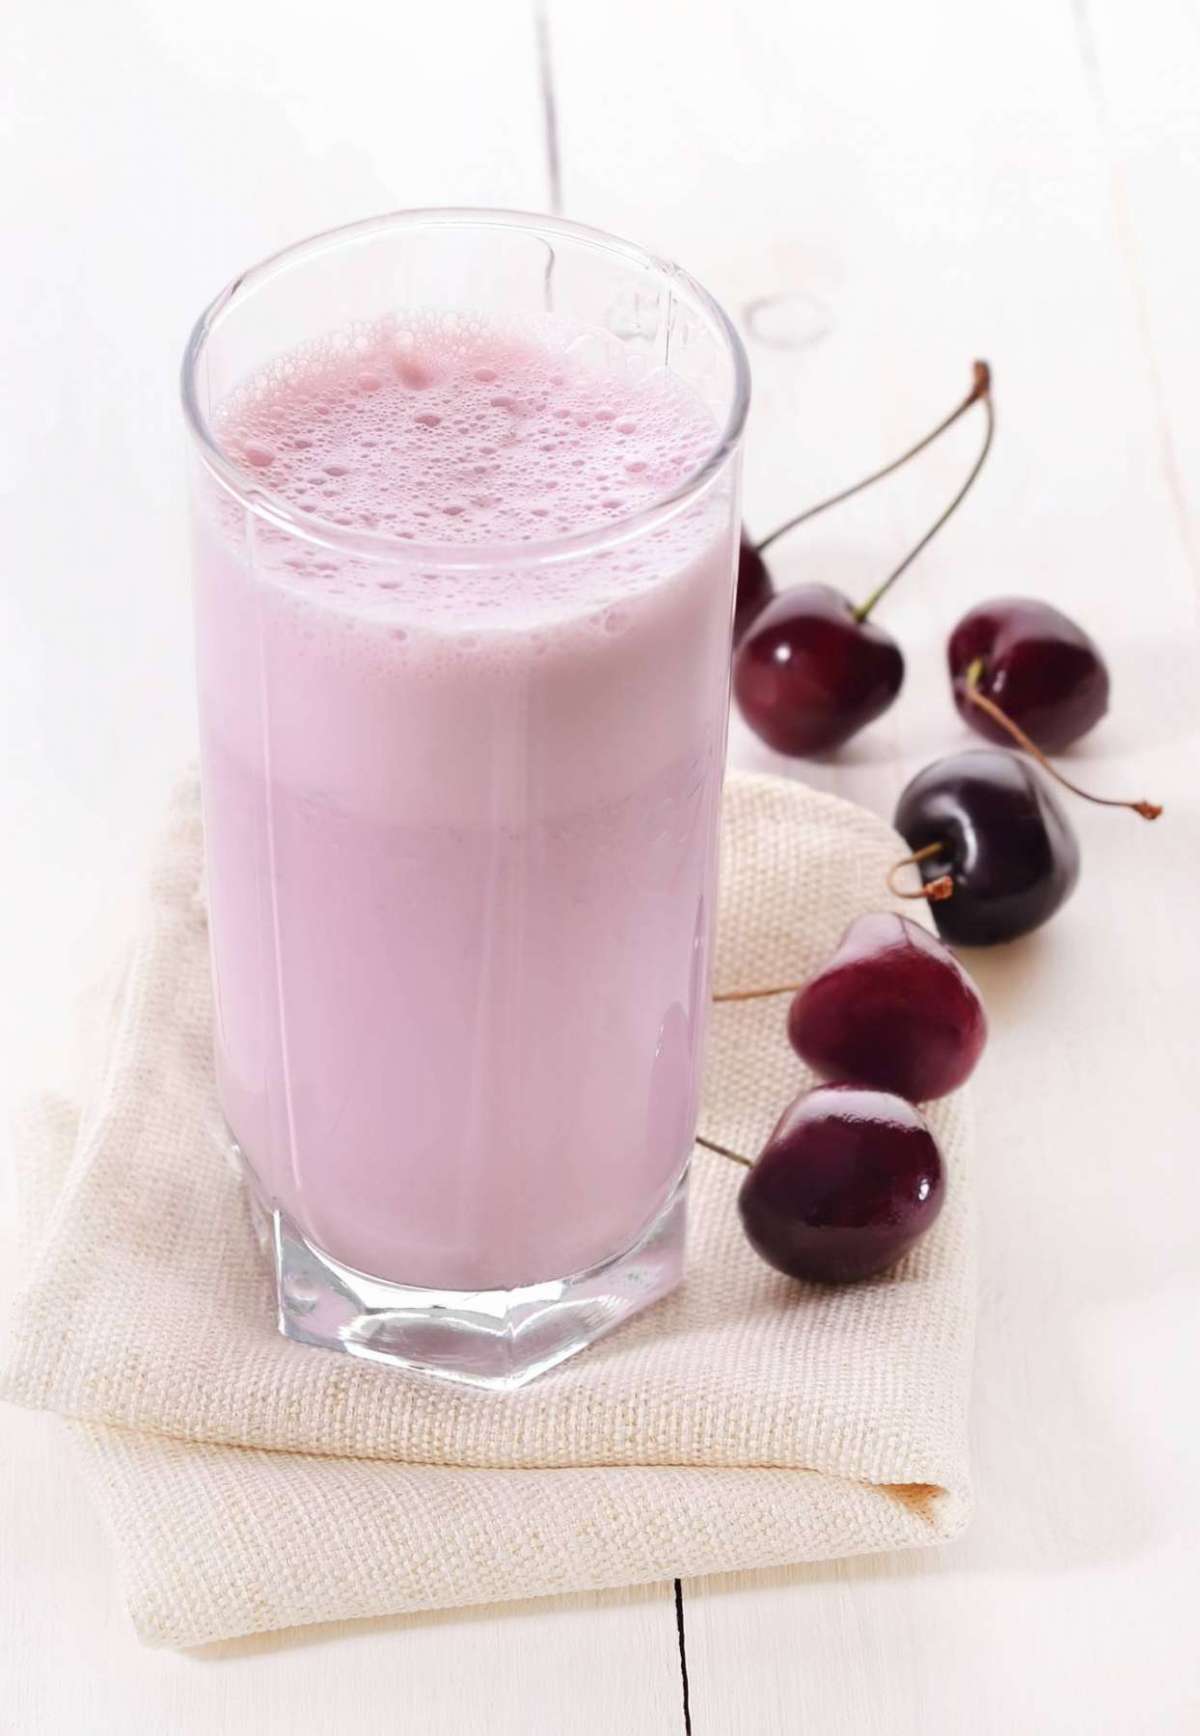 Kirsch Smoothies Archive - SmoothieWelt.com